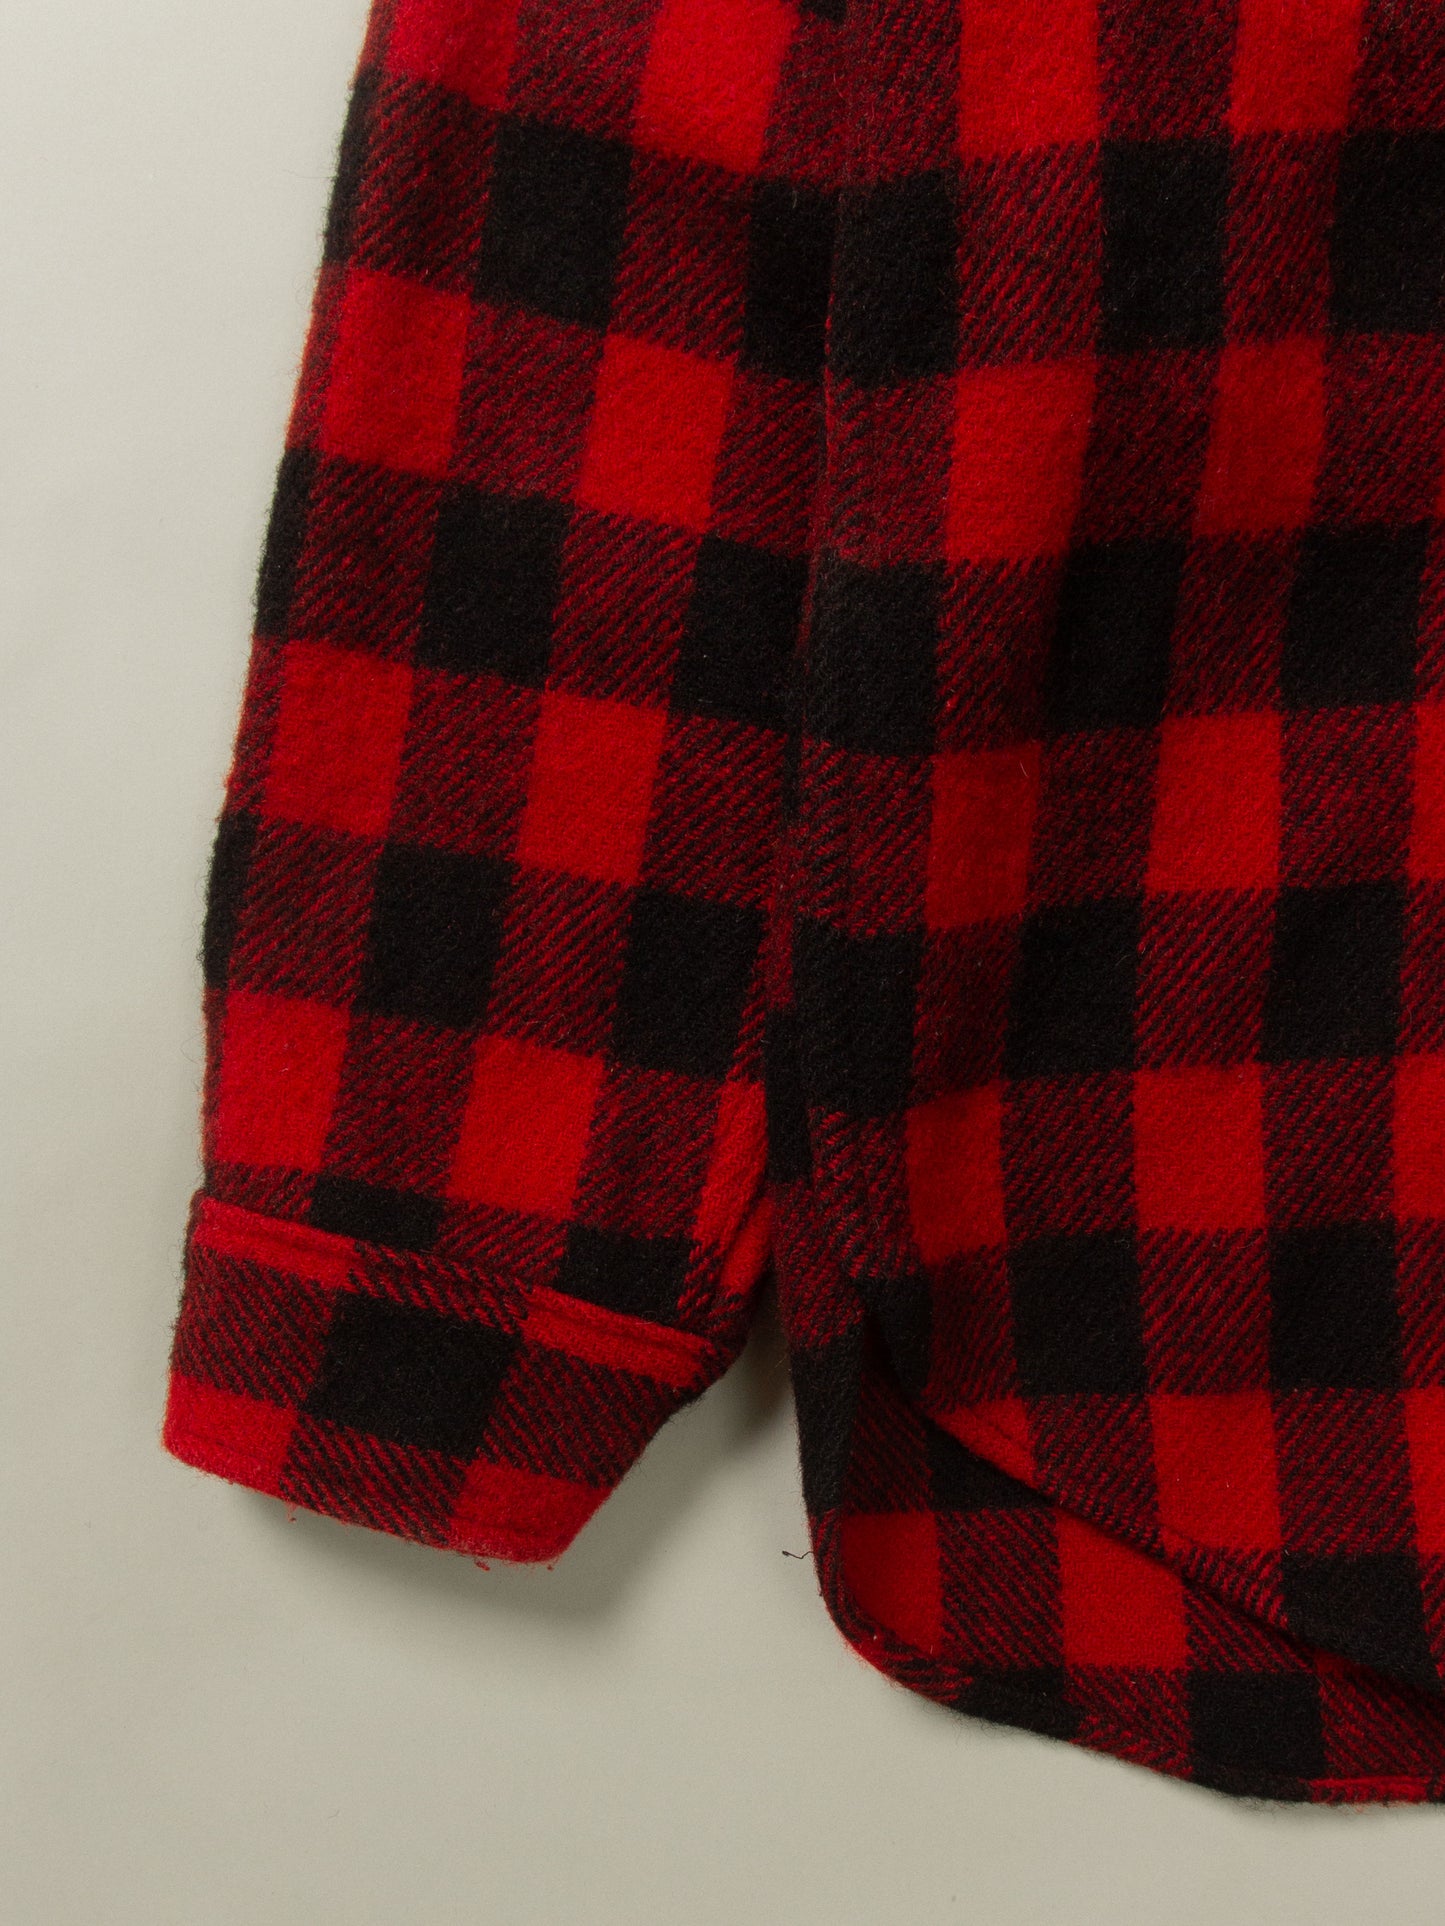 Vtg 1980s Woolrich Plaid Flannel Shirt - Made in USA (L)